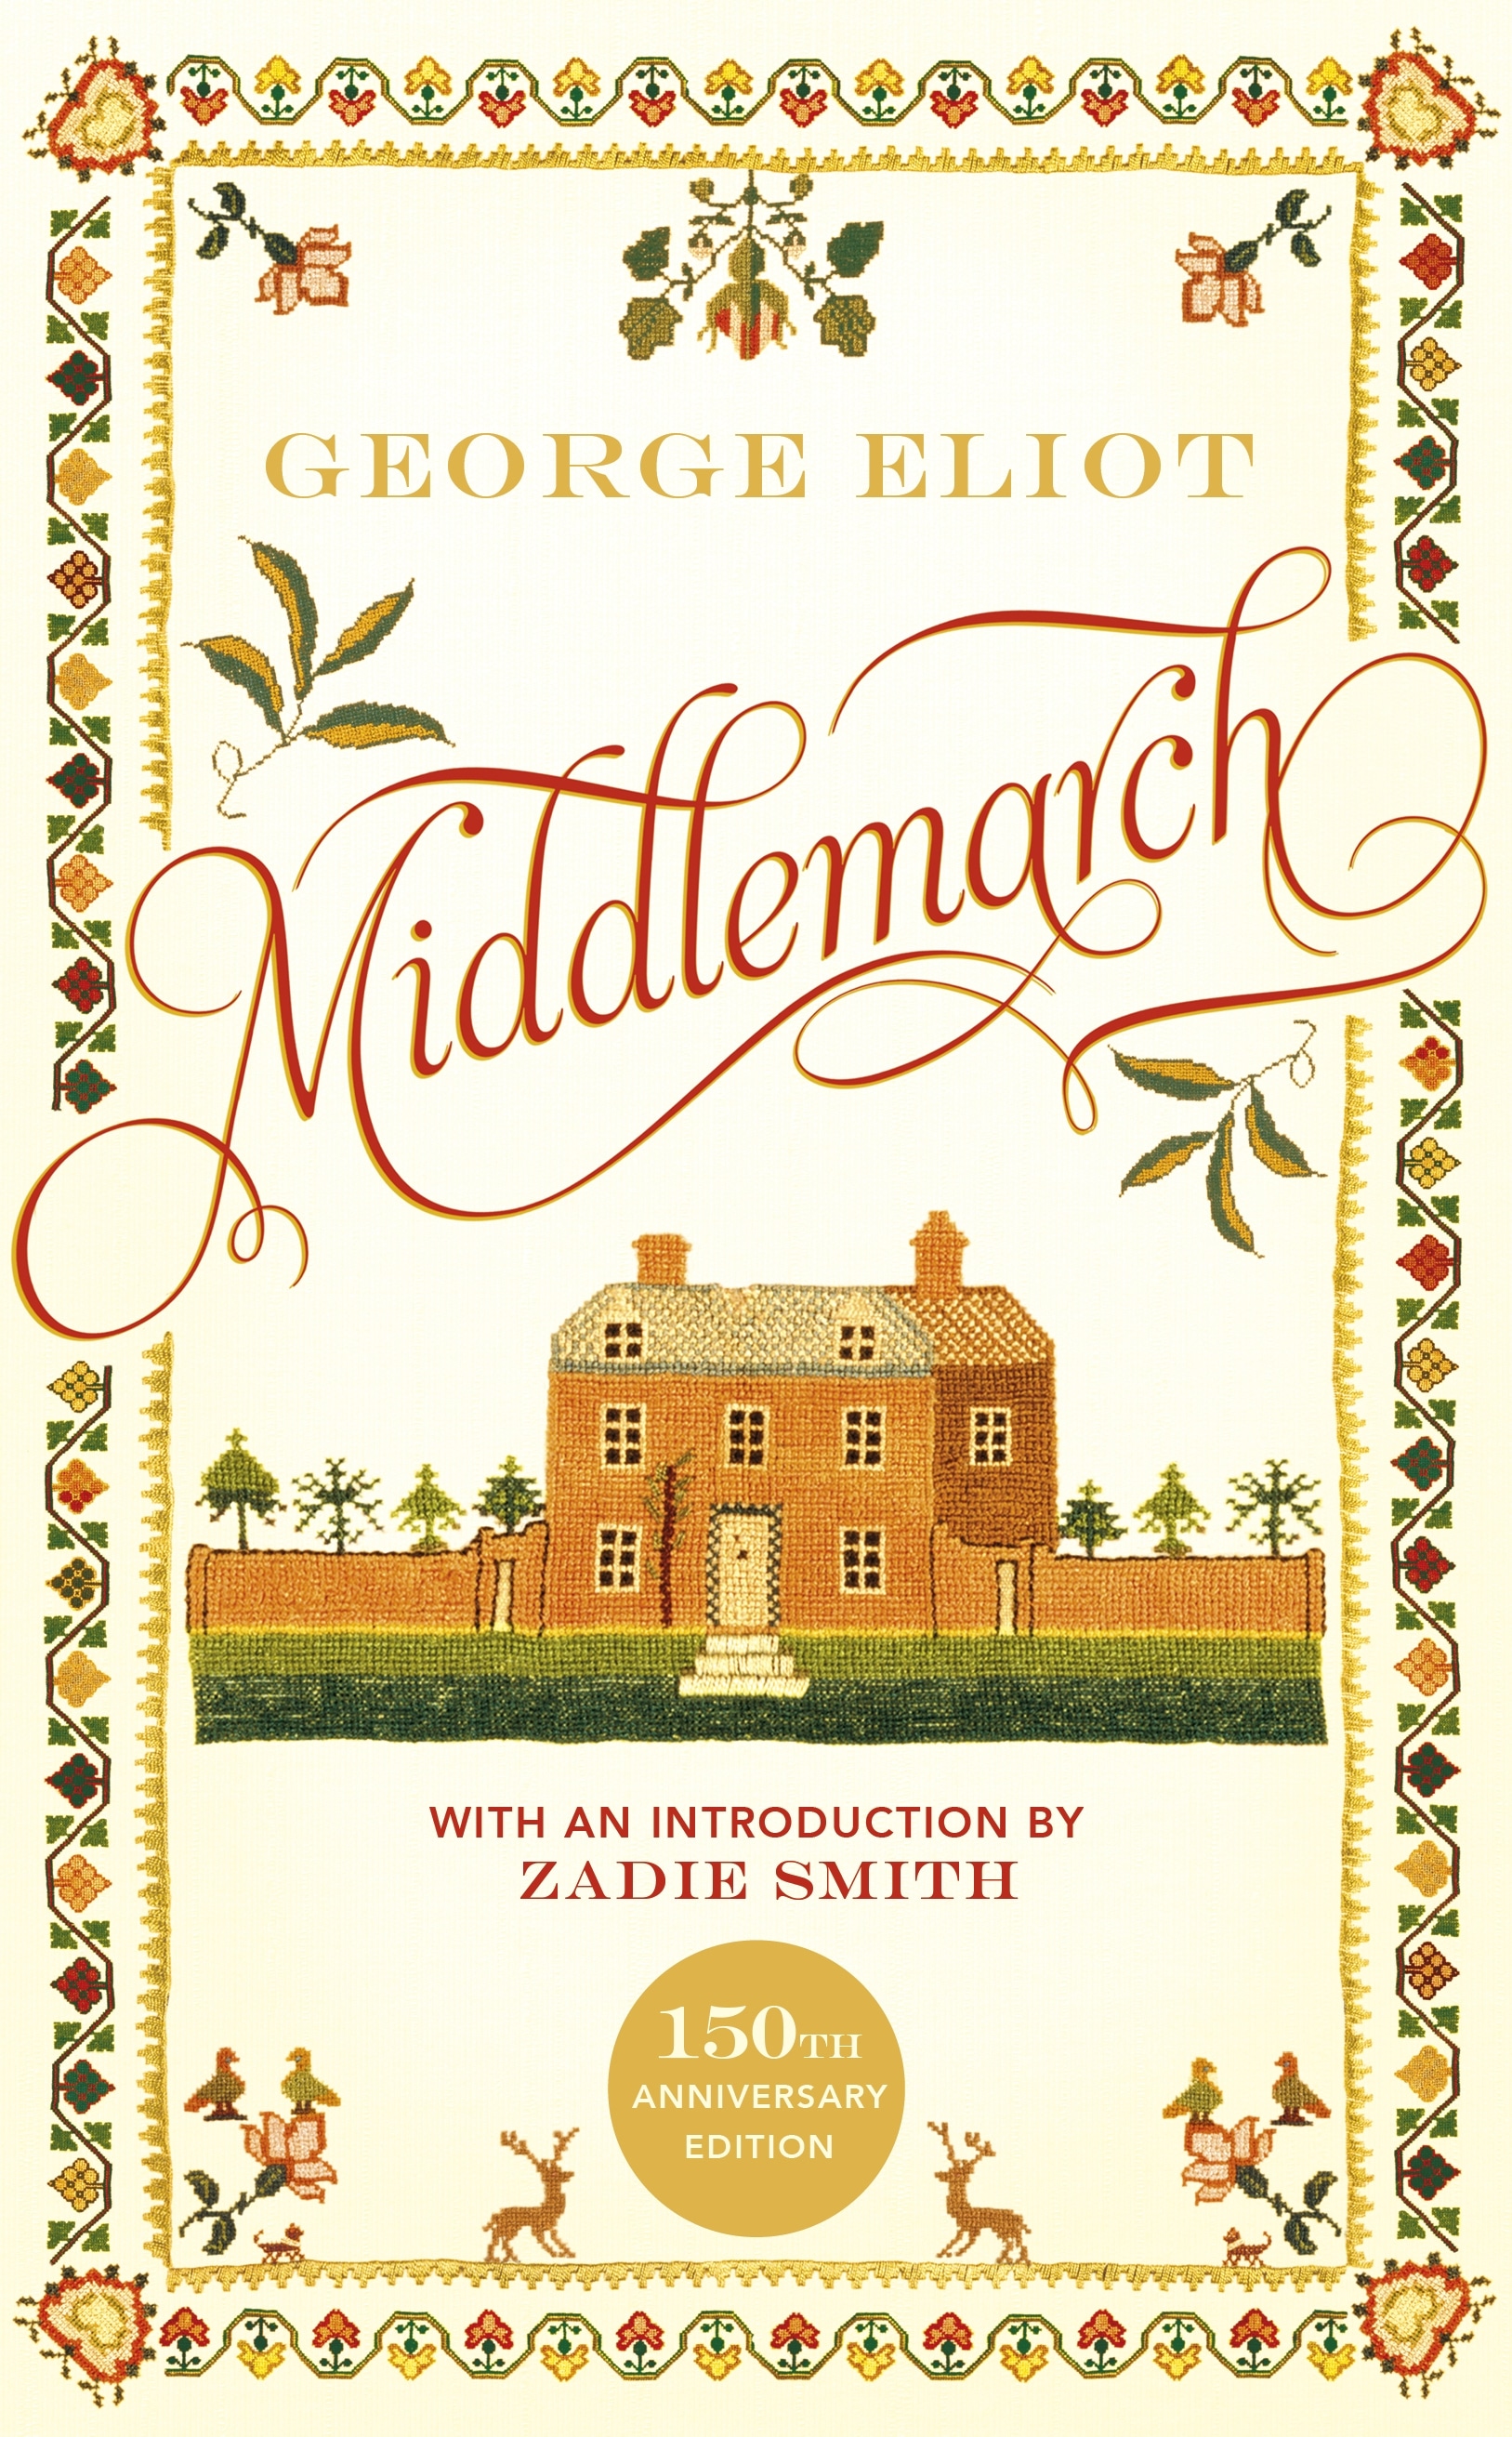 Book “Middlemarch” by George Eliot — December 2, 2021